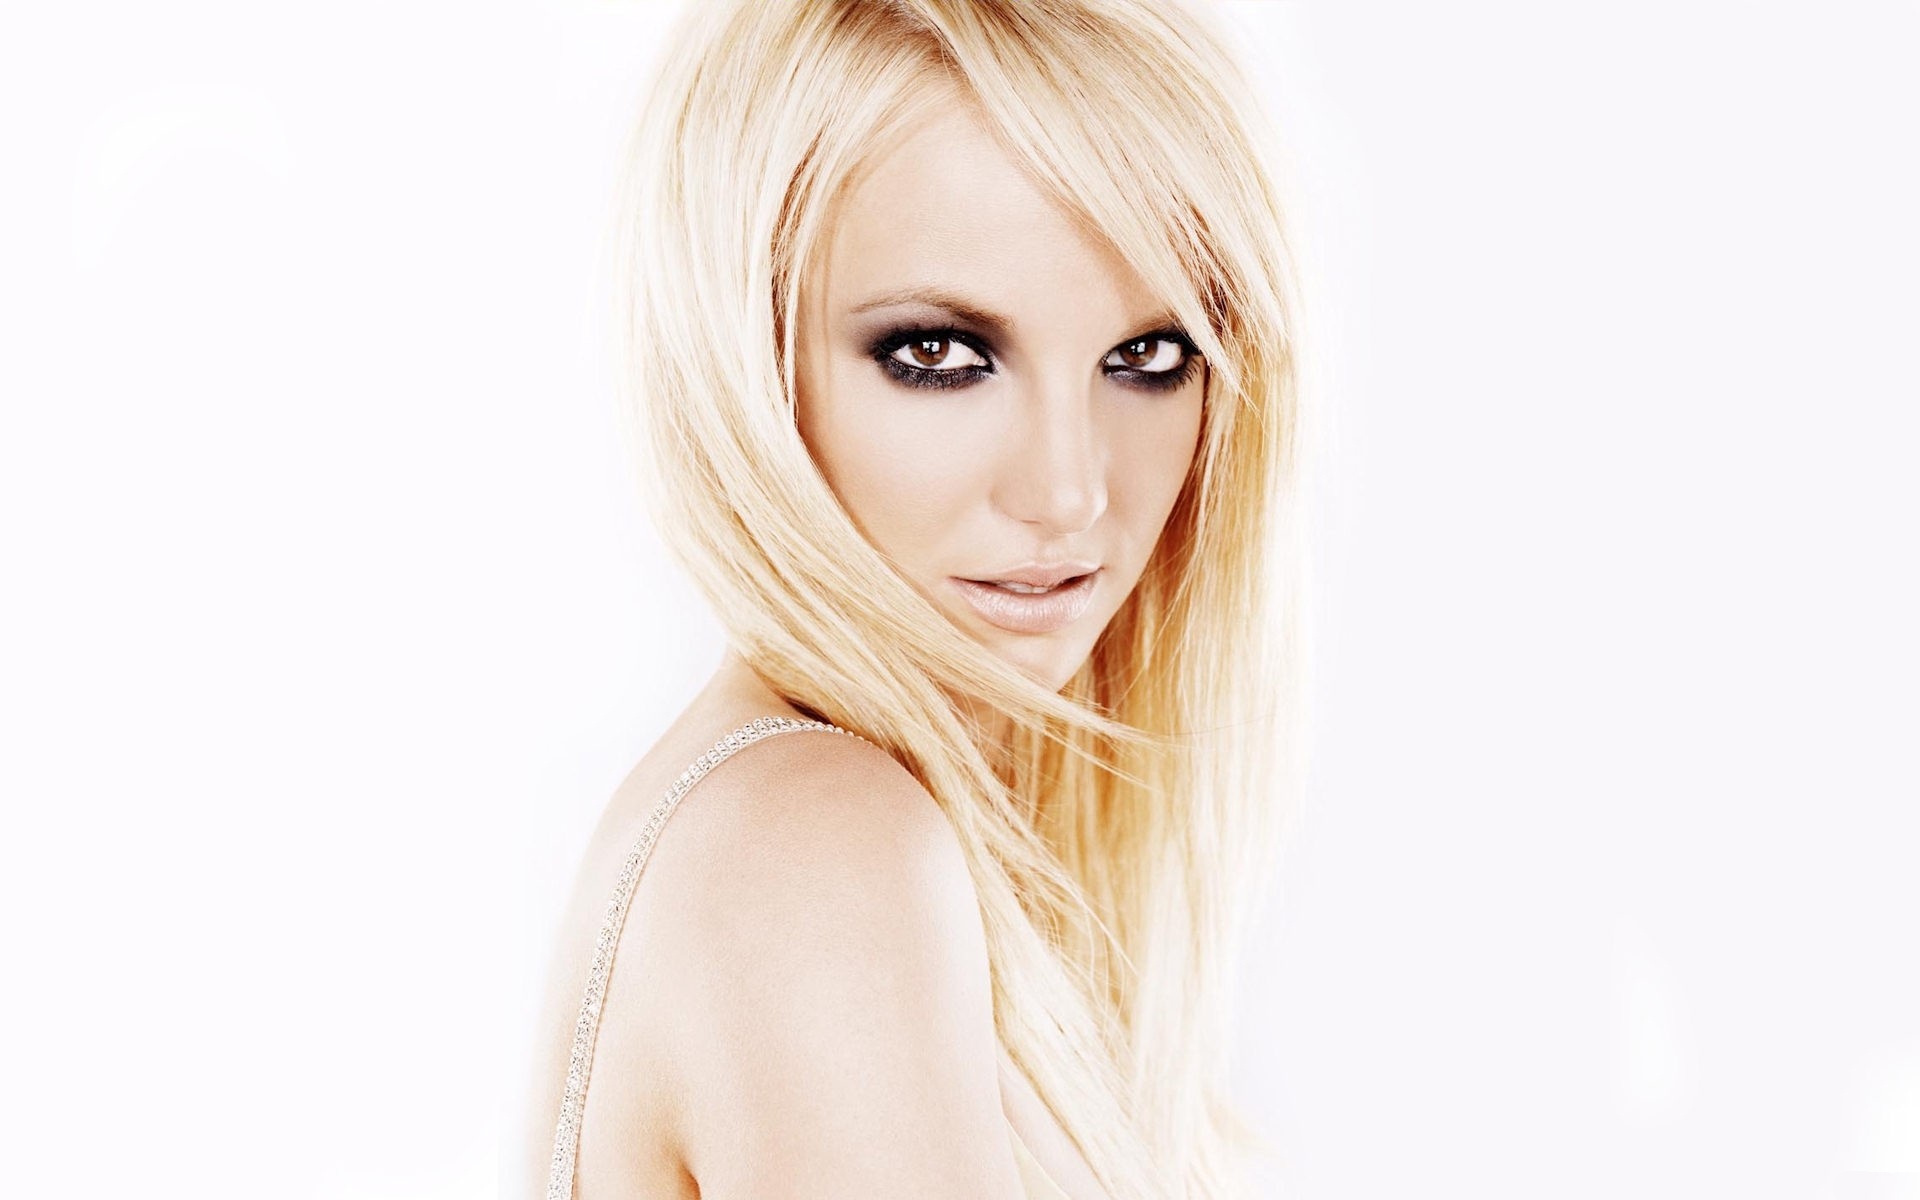  Britney Spears Tablet Wallpapers